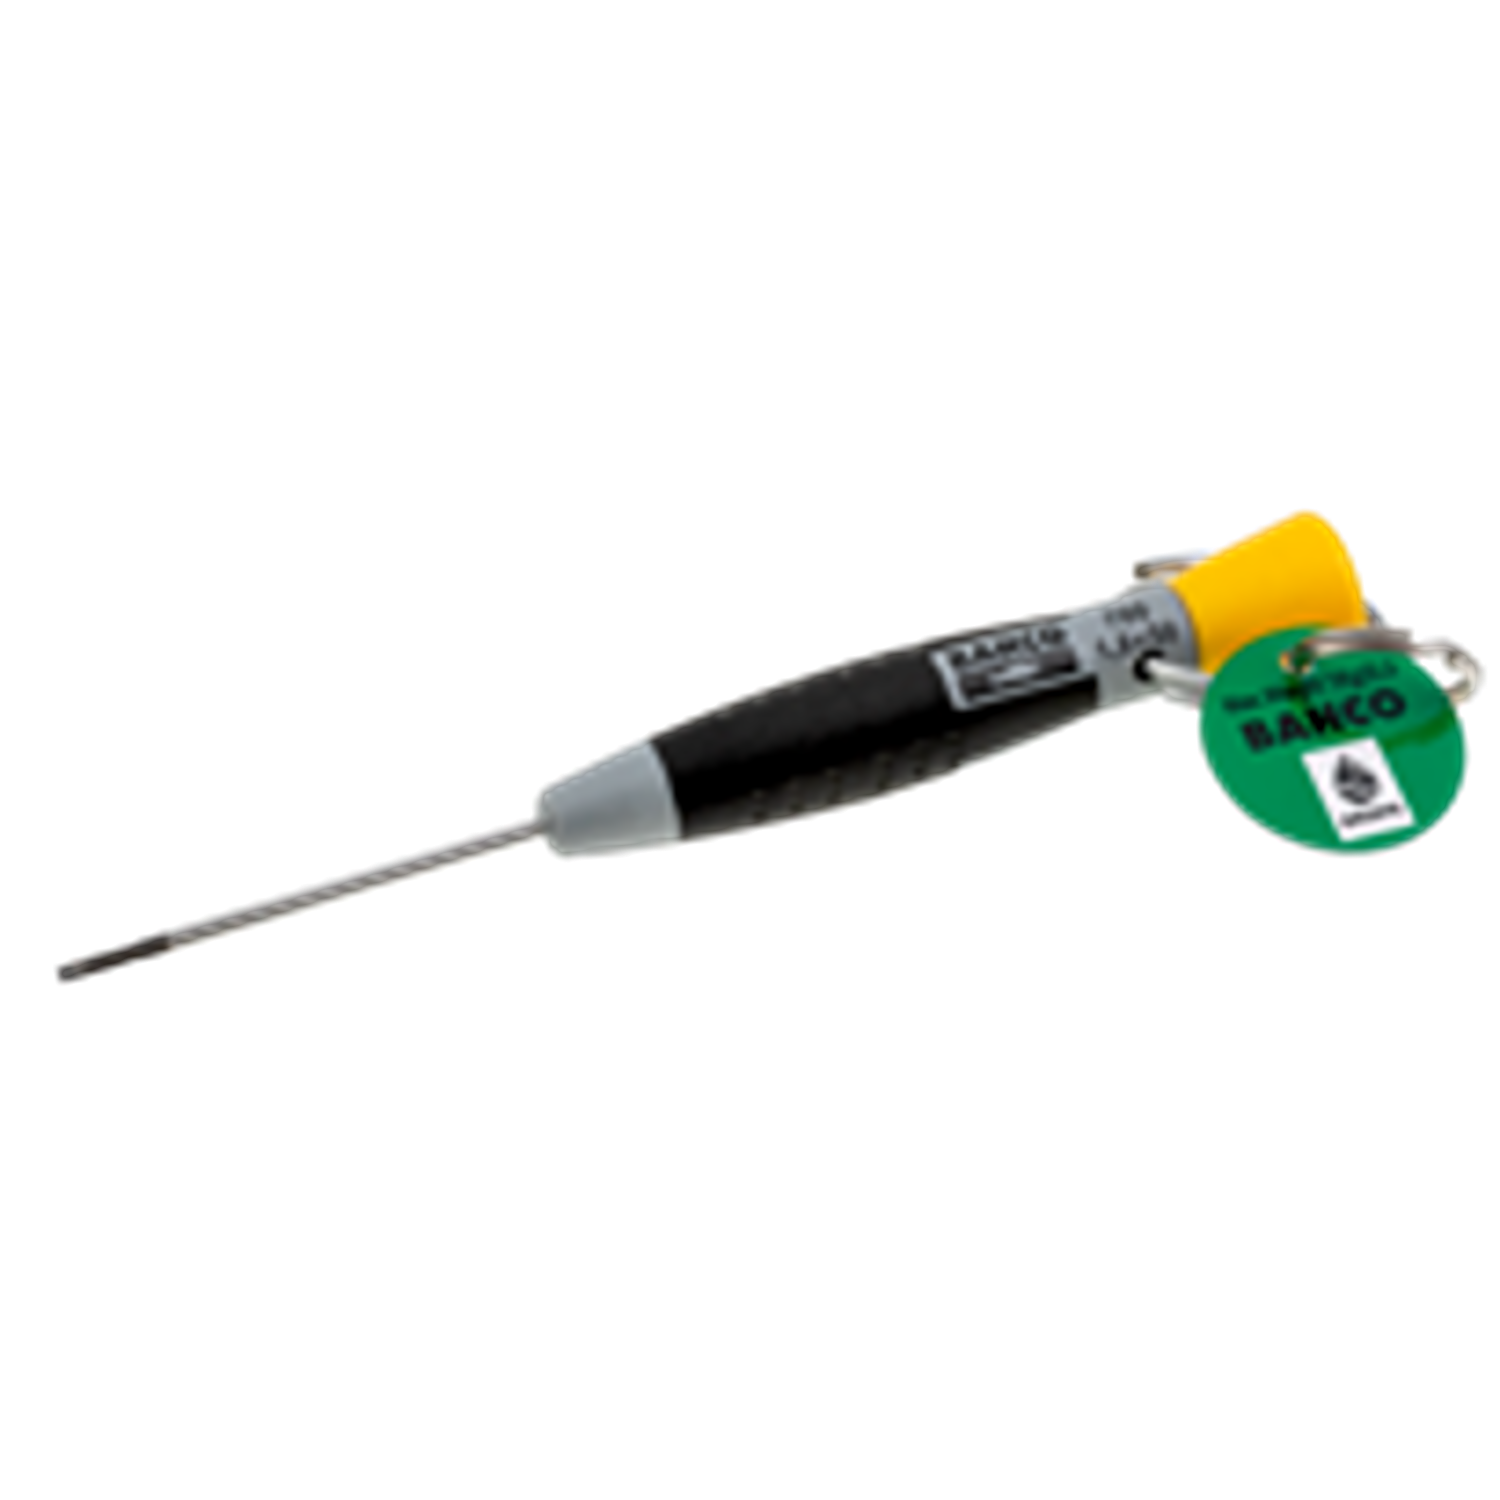 BAHCO TAH700 Slotted Screwdriver with Precision Grip 0.18–0.8mm - Premium Slotted Screwdriver from BAHCO - Shop now at Yew Aik.